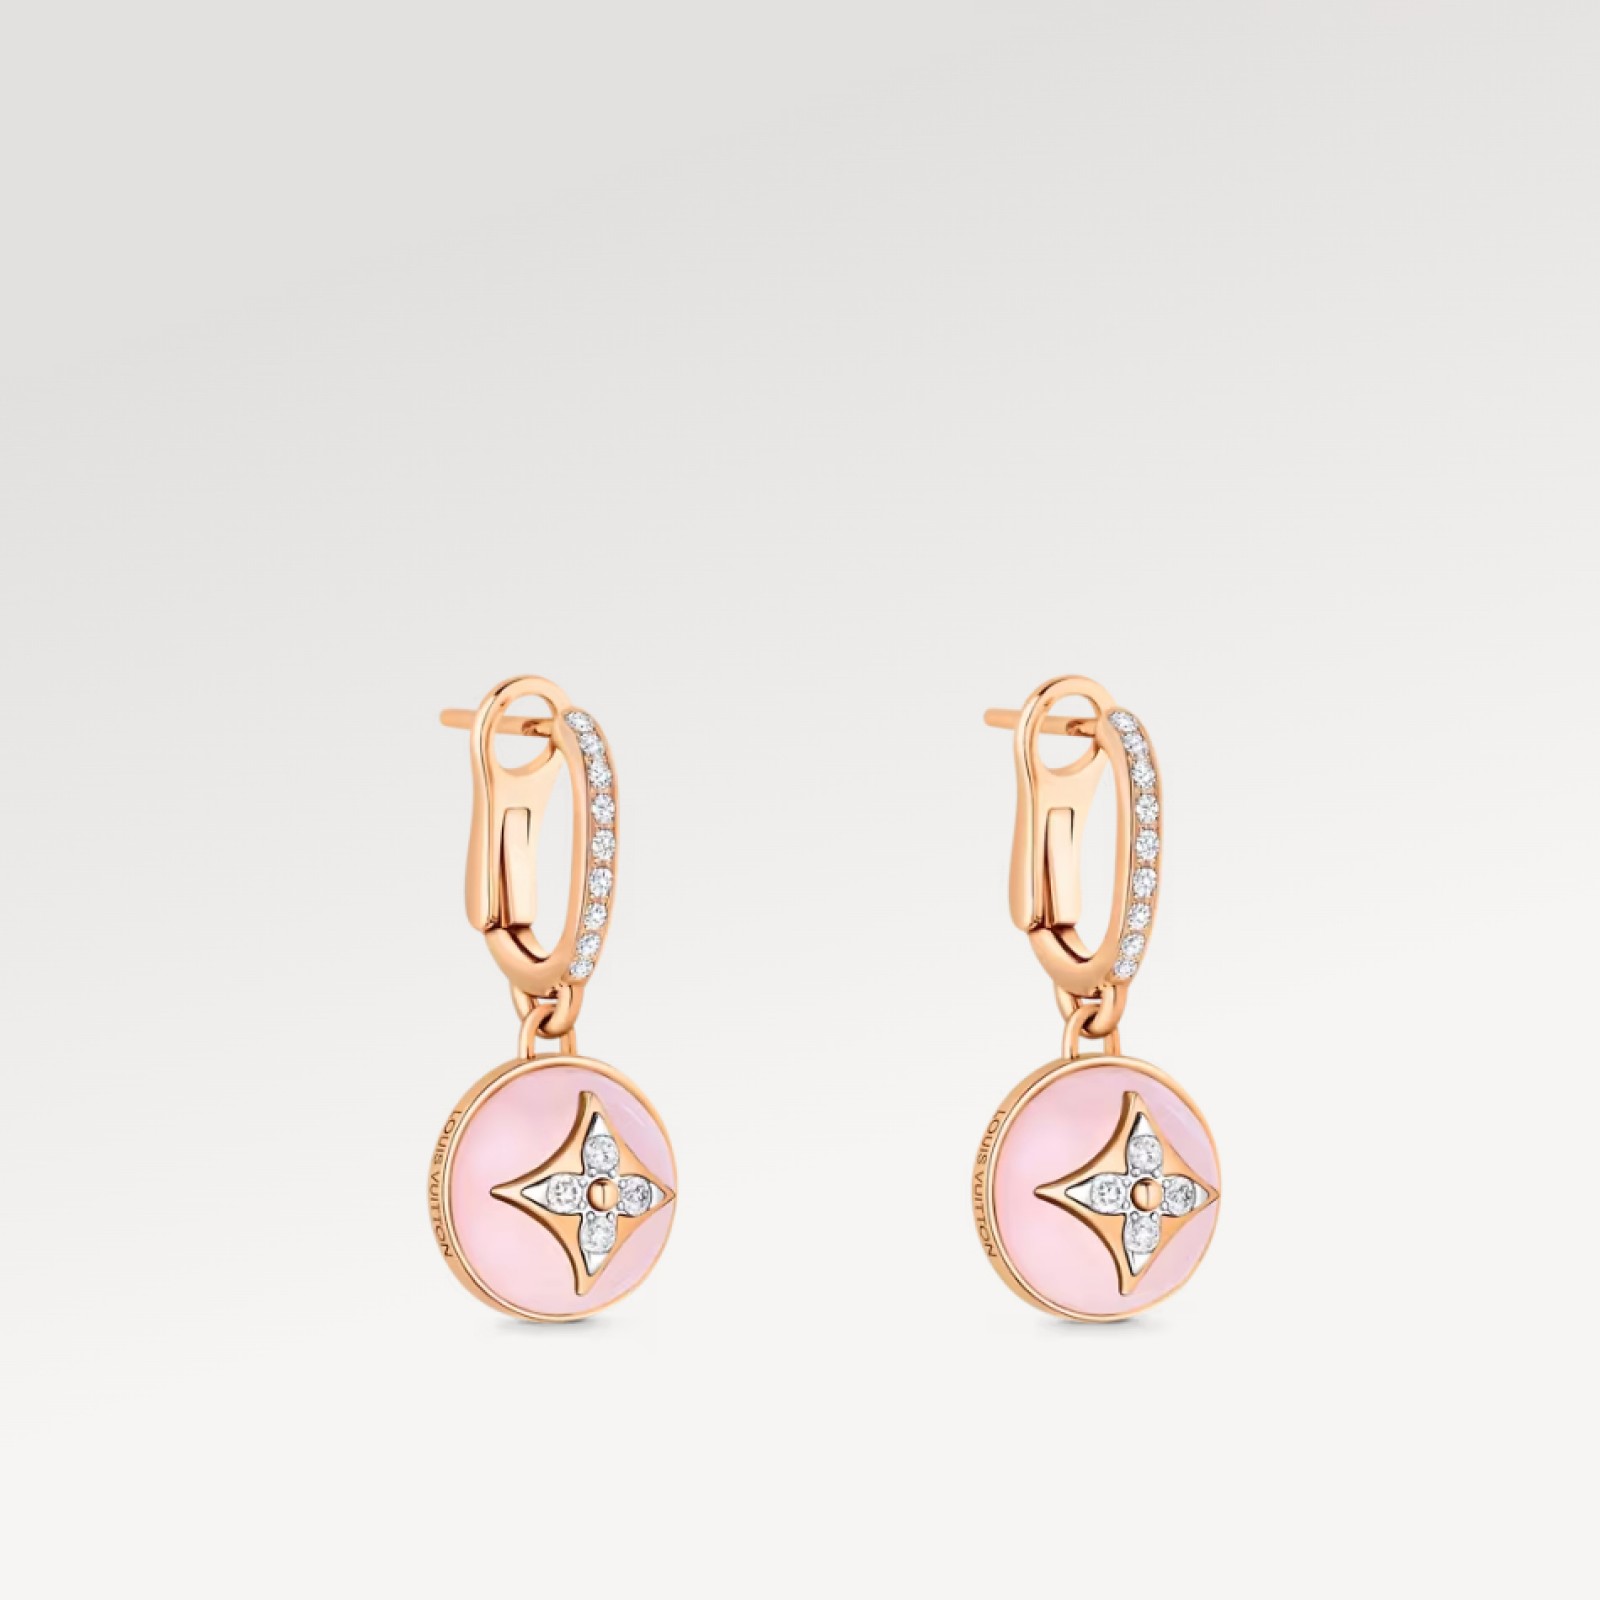 Color Blossom Earrings, Pink Gold, White Gold, Pink Opal And Diamonds